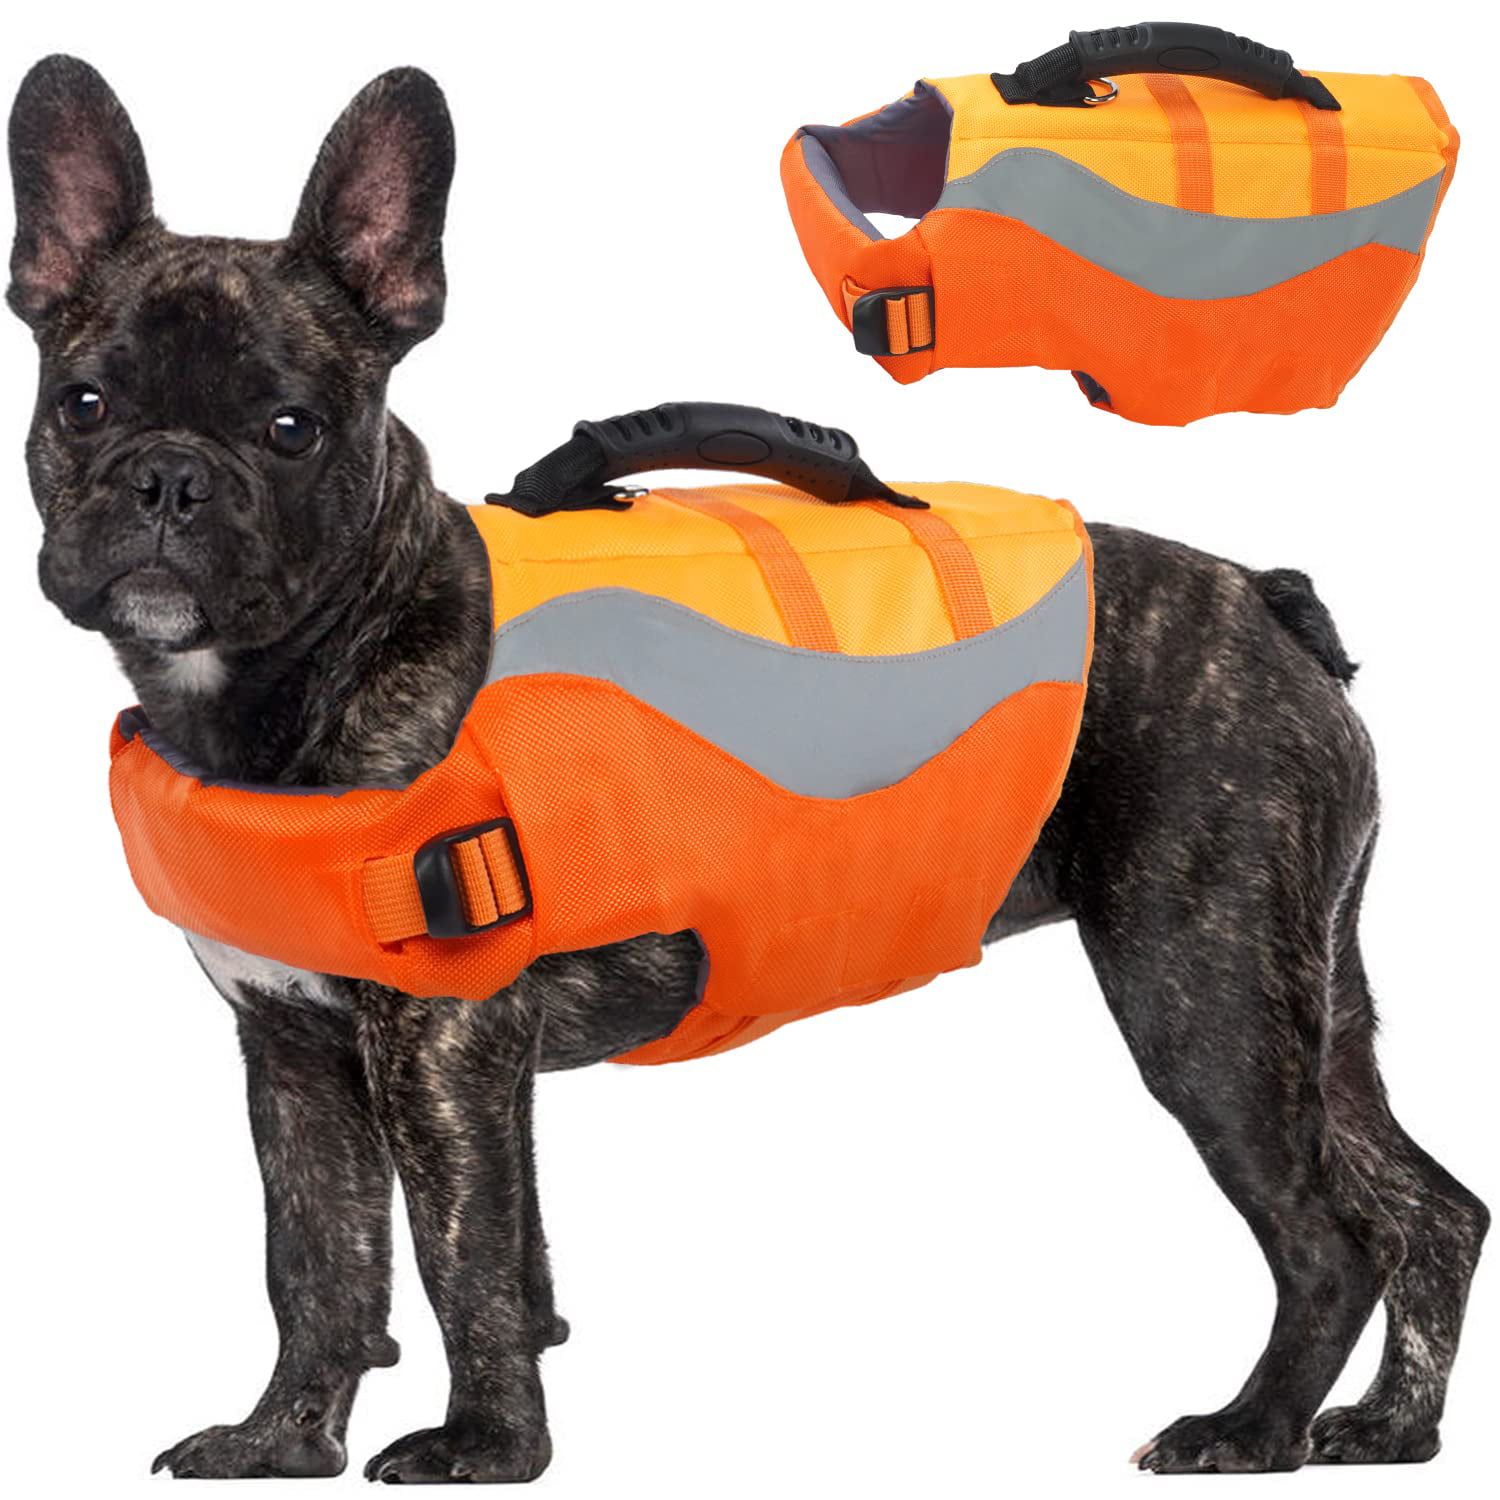 Ripstop Pets Floatation Lifesaver Puppy Reflective Safety Swimsuit Preserver IDOMIK Dog Life Jacket Vest Adjustable Life Coat with Rescue Handle for Small Medium Large Dogs Swimming Surfing Boating 